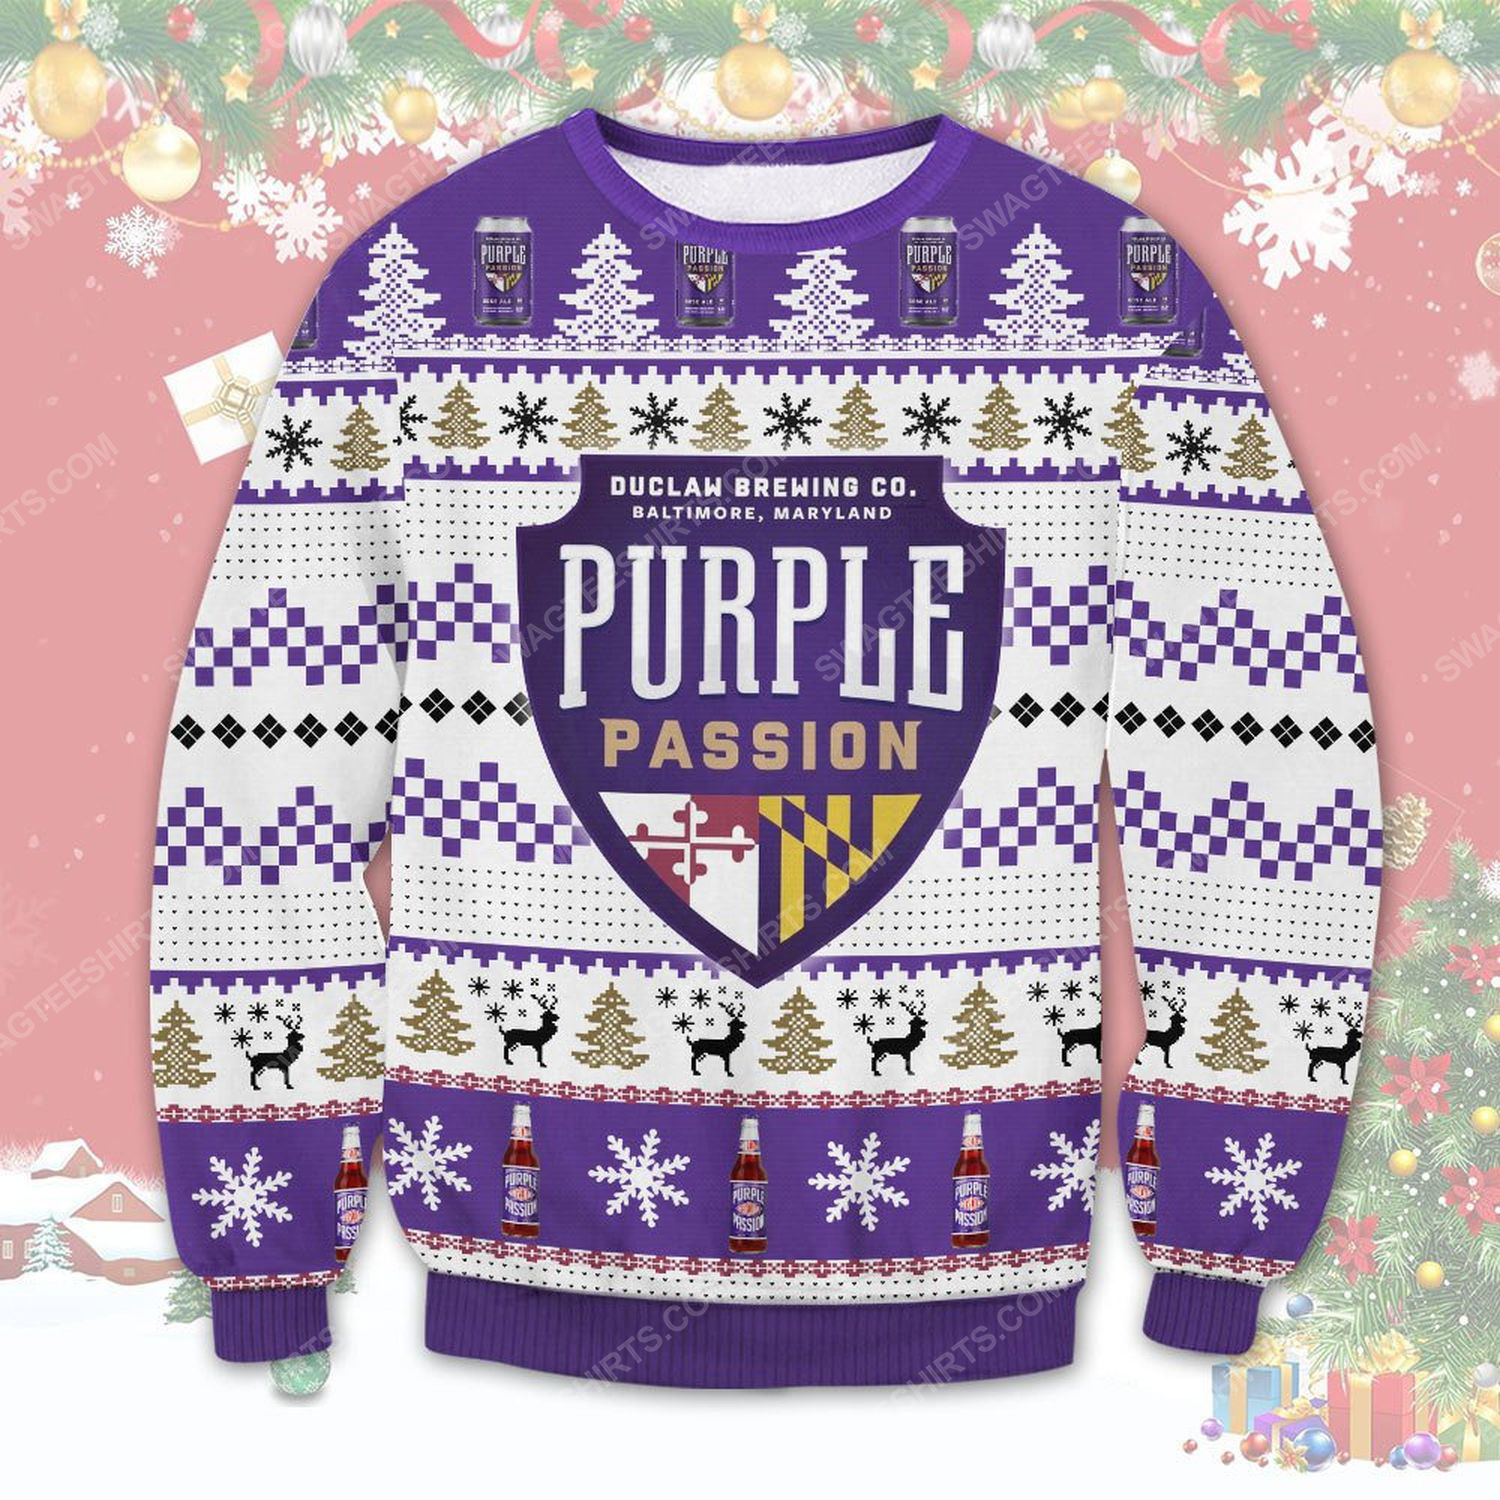 Purple passion duclaw brewing ugly christmas sweater 1 - Copy (2)